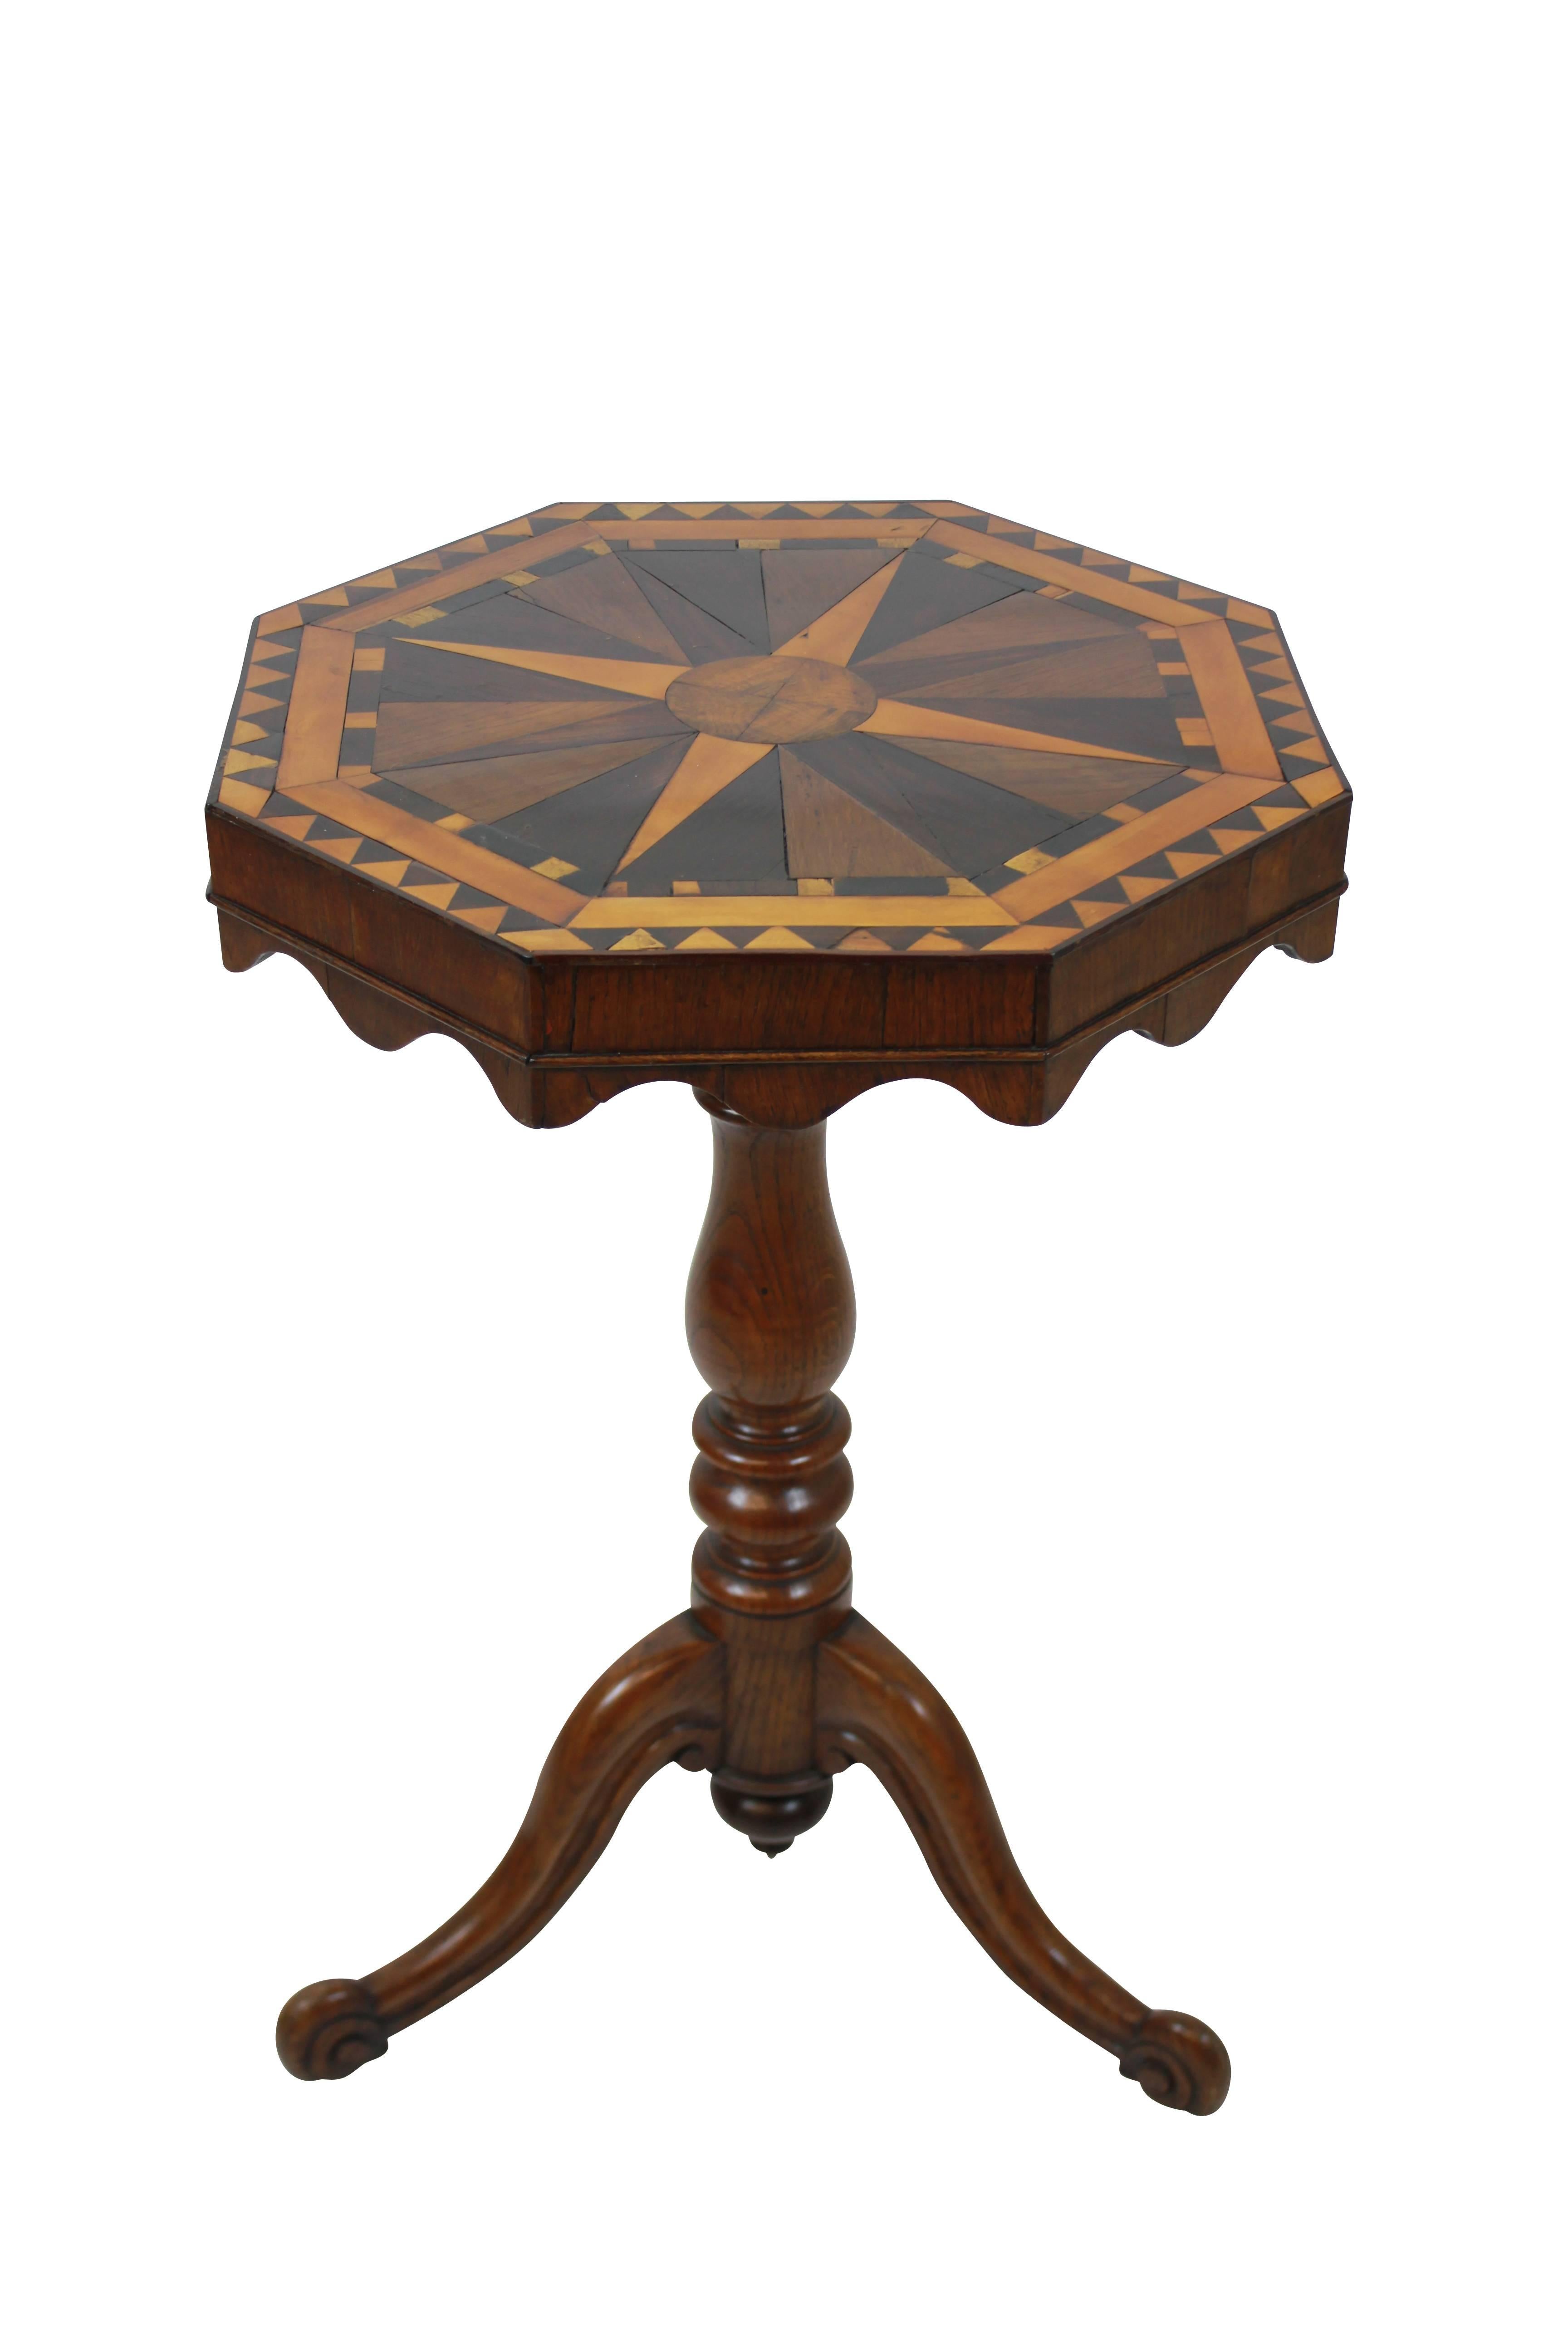 Early 19th Century 19th Century English Geometric Marquetry Side Table